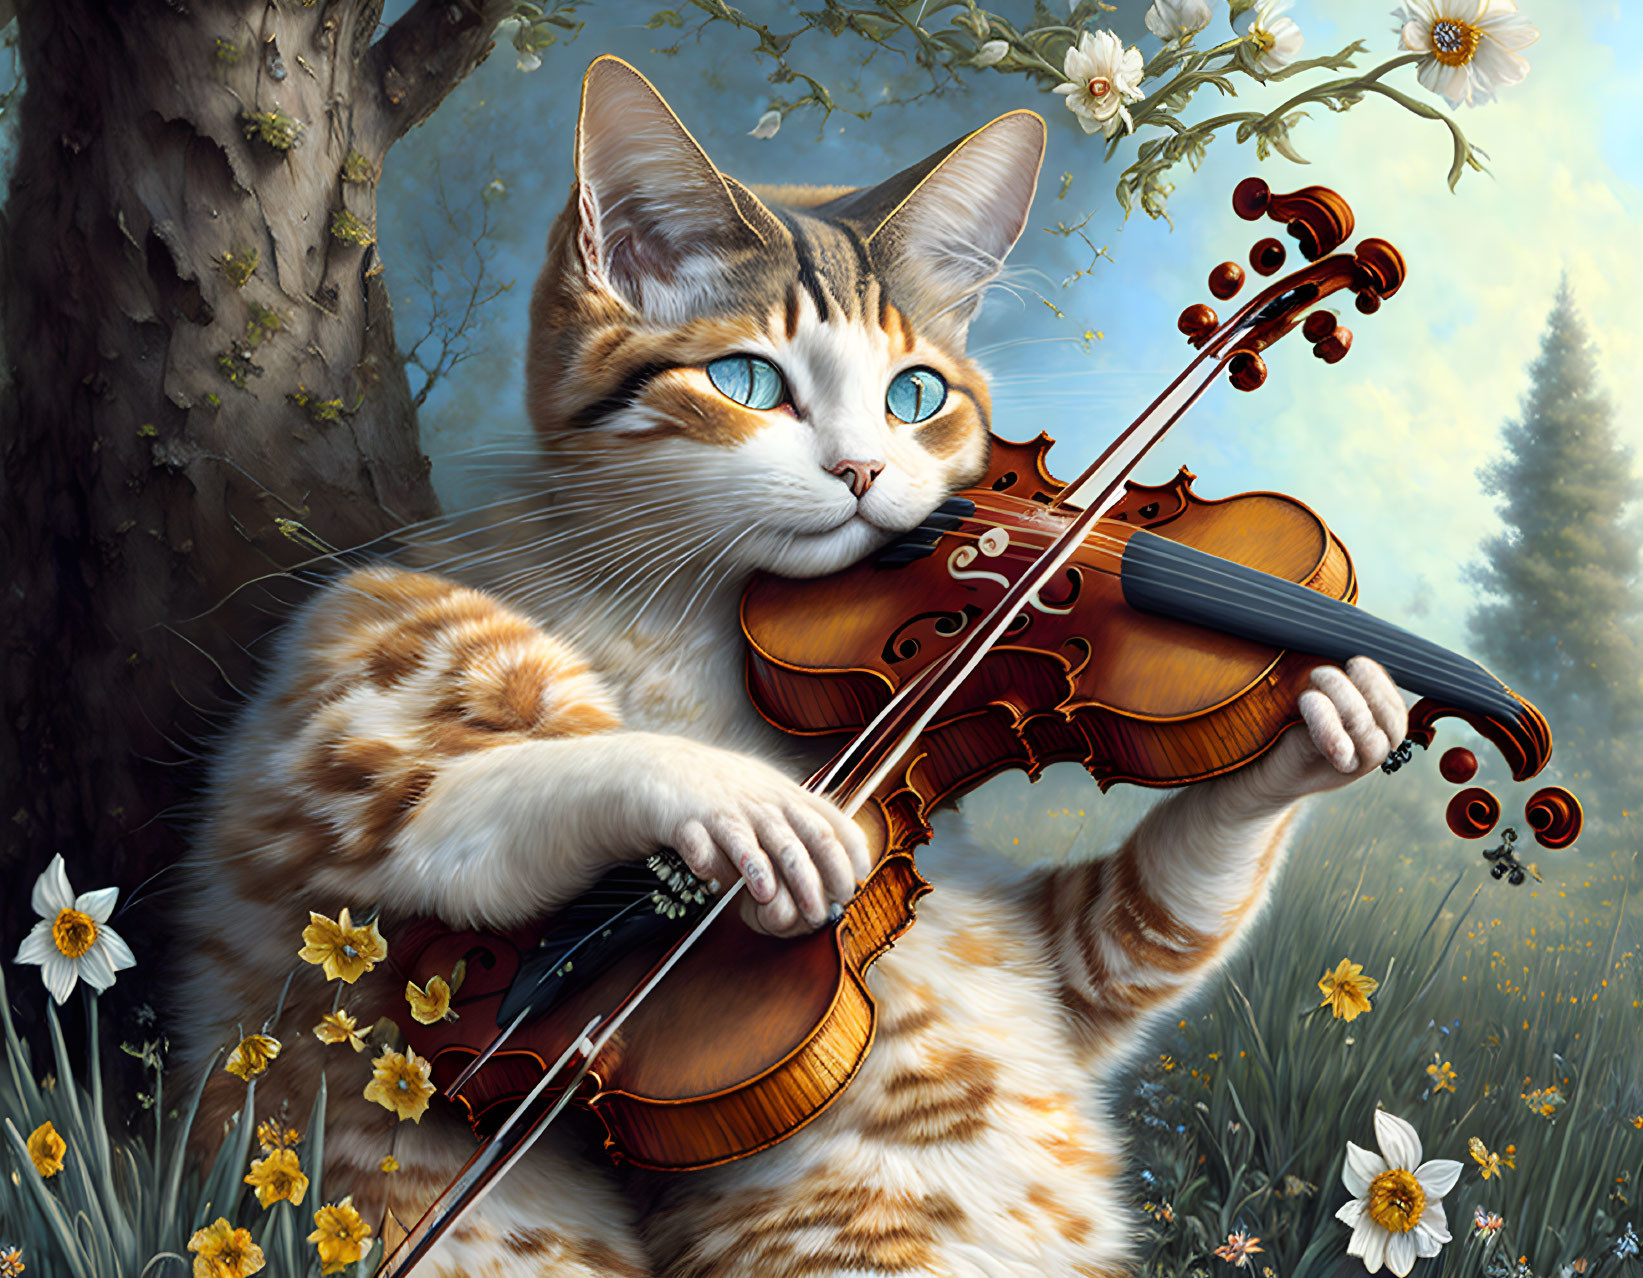 Daffodils cat playing violin. extreme details, ful